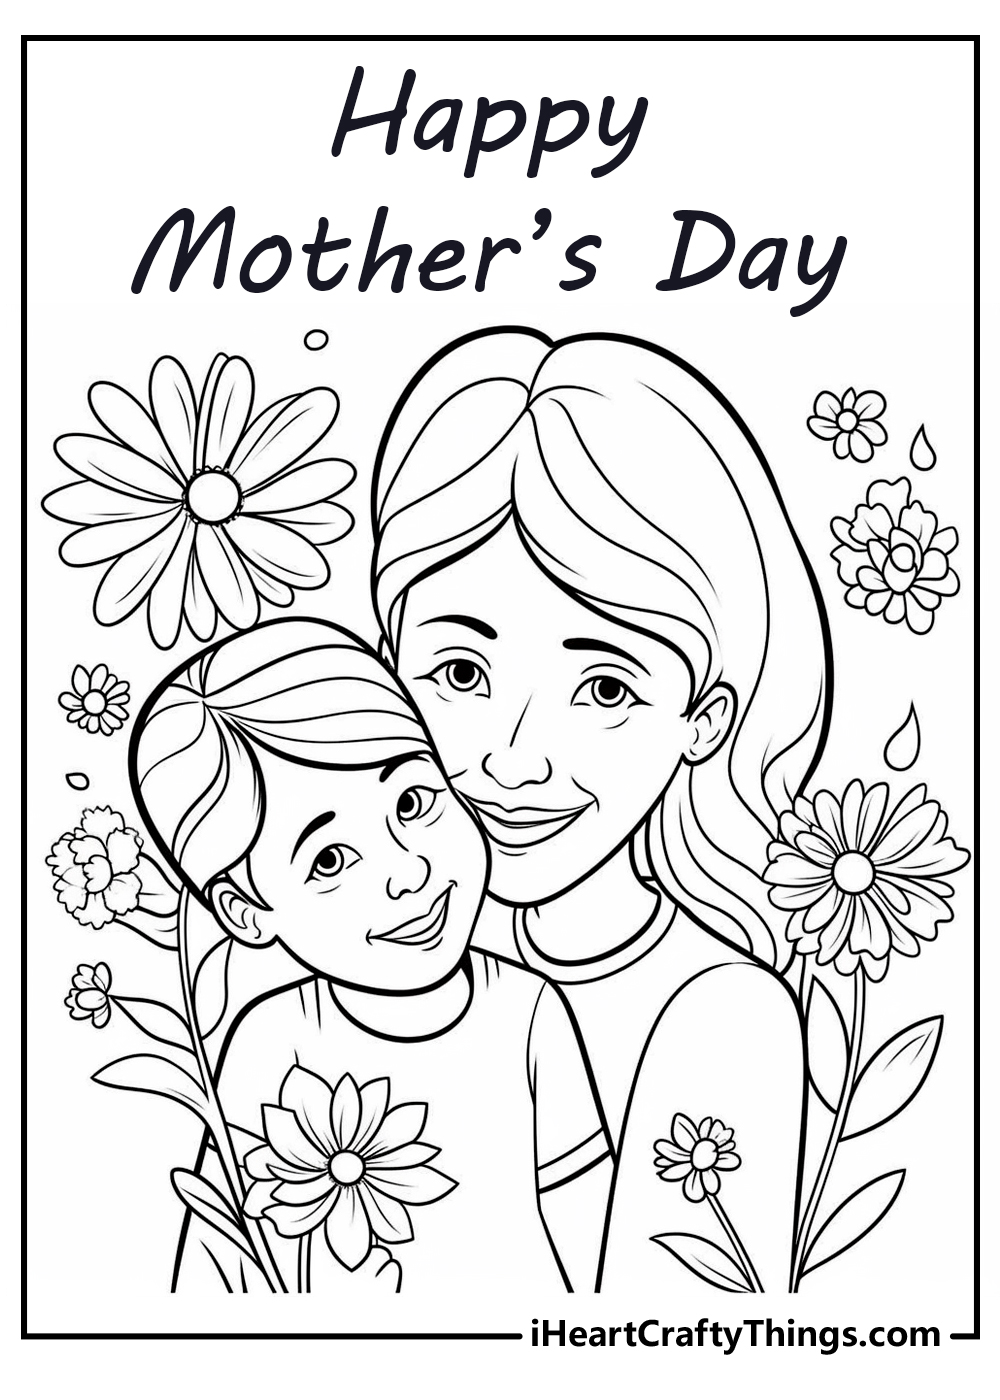 mother's day coloring pdf sheet